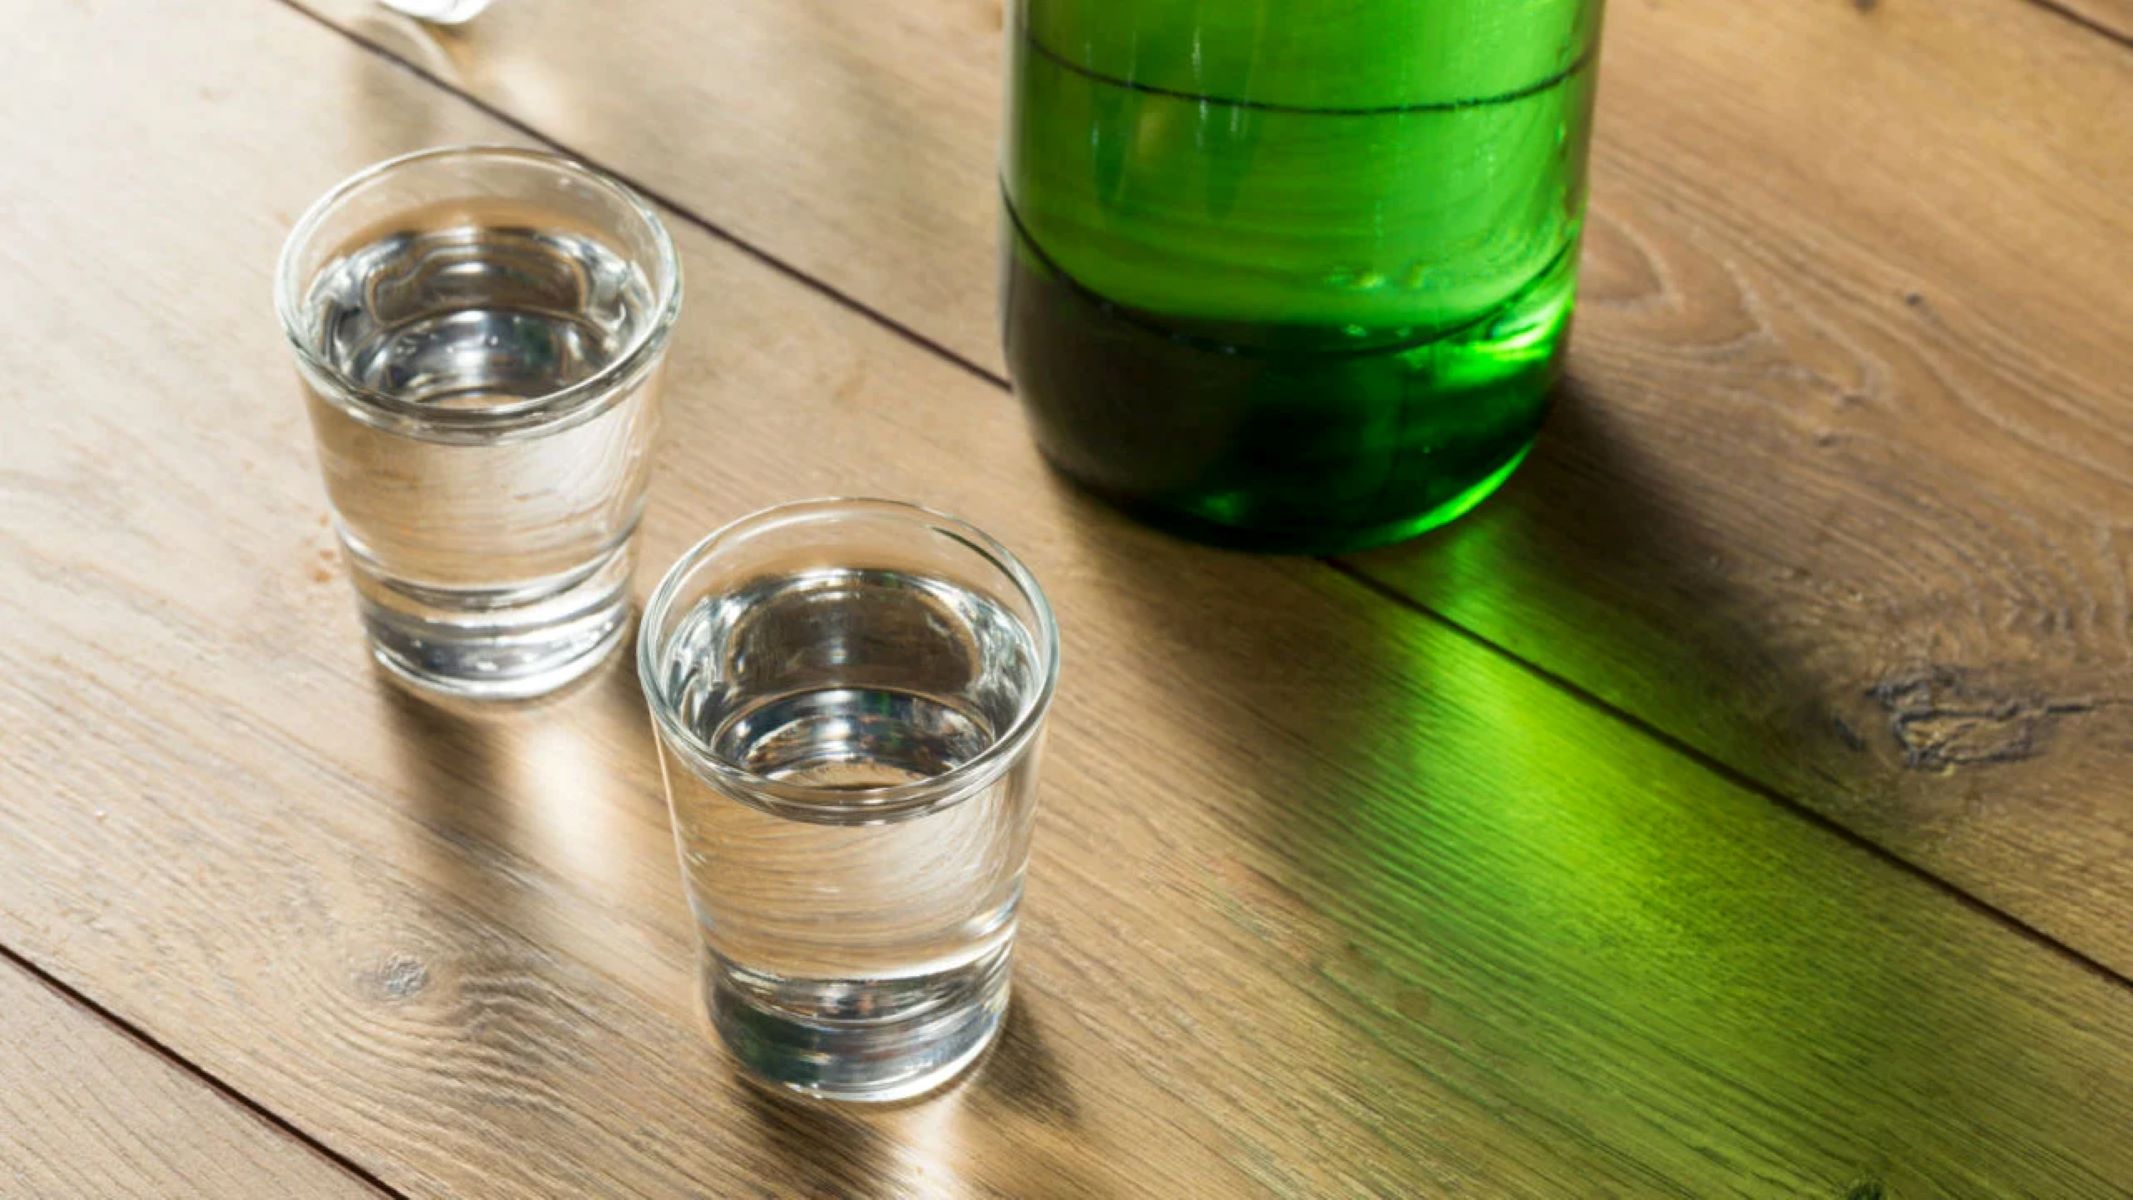 Japanese Sake Vs Korean Soju: The Ultimate Showdown! Which Is The Perfect Straight-Up Drink?